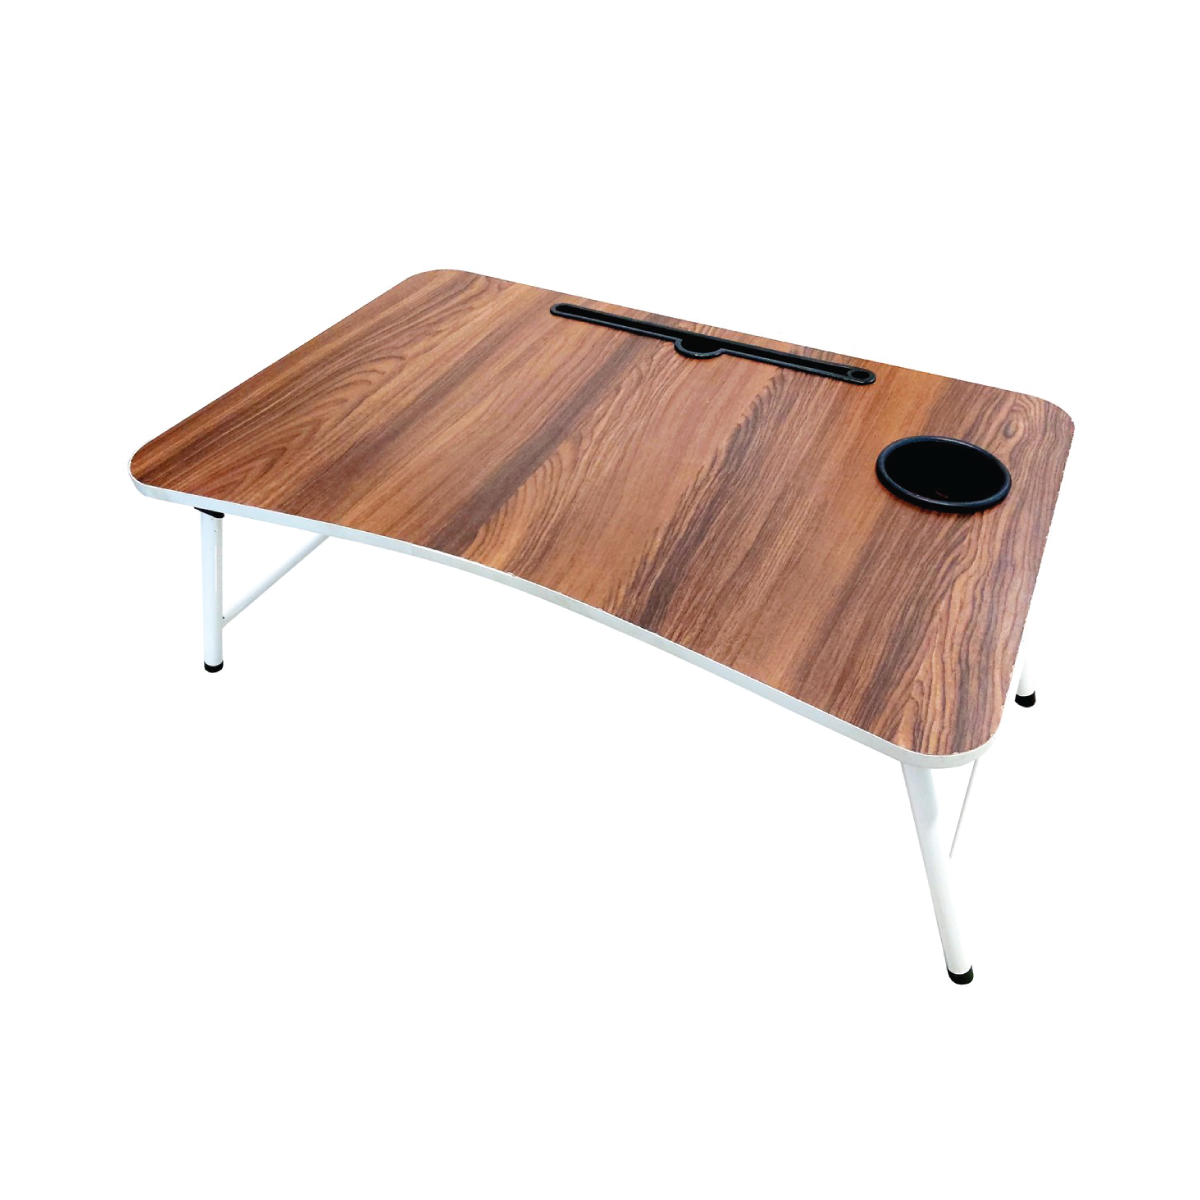 Folding Wooden Laptop Desk Table - For Office Use, Personal Use, Students Study Table, Corporate Gifting JALDTL00